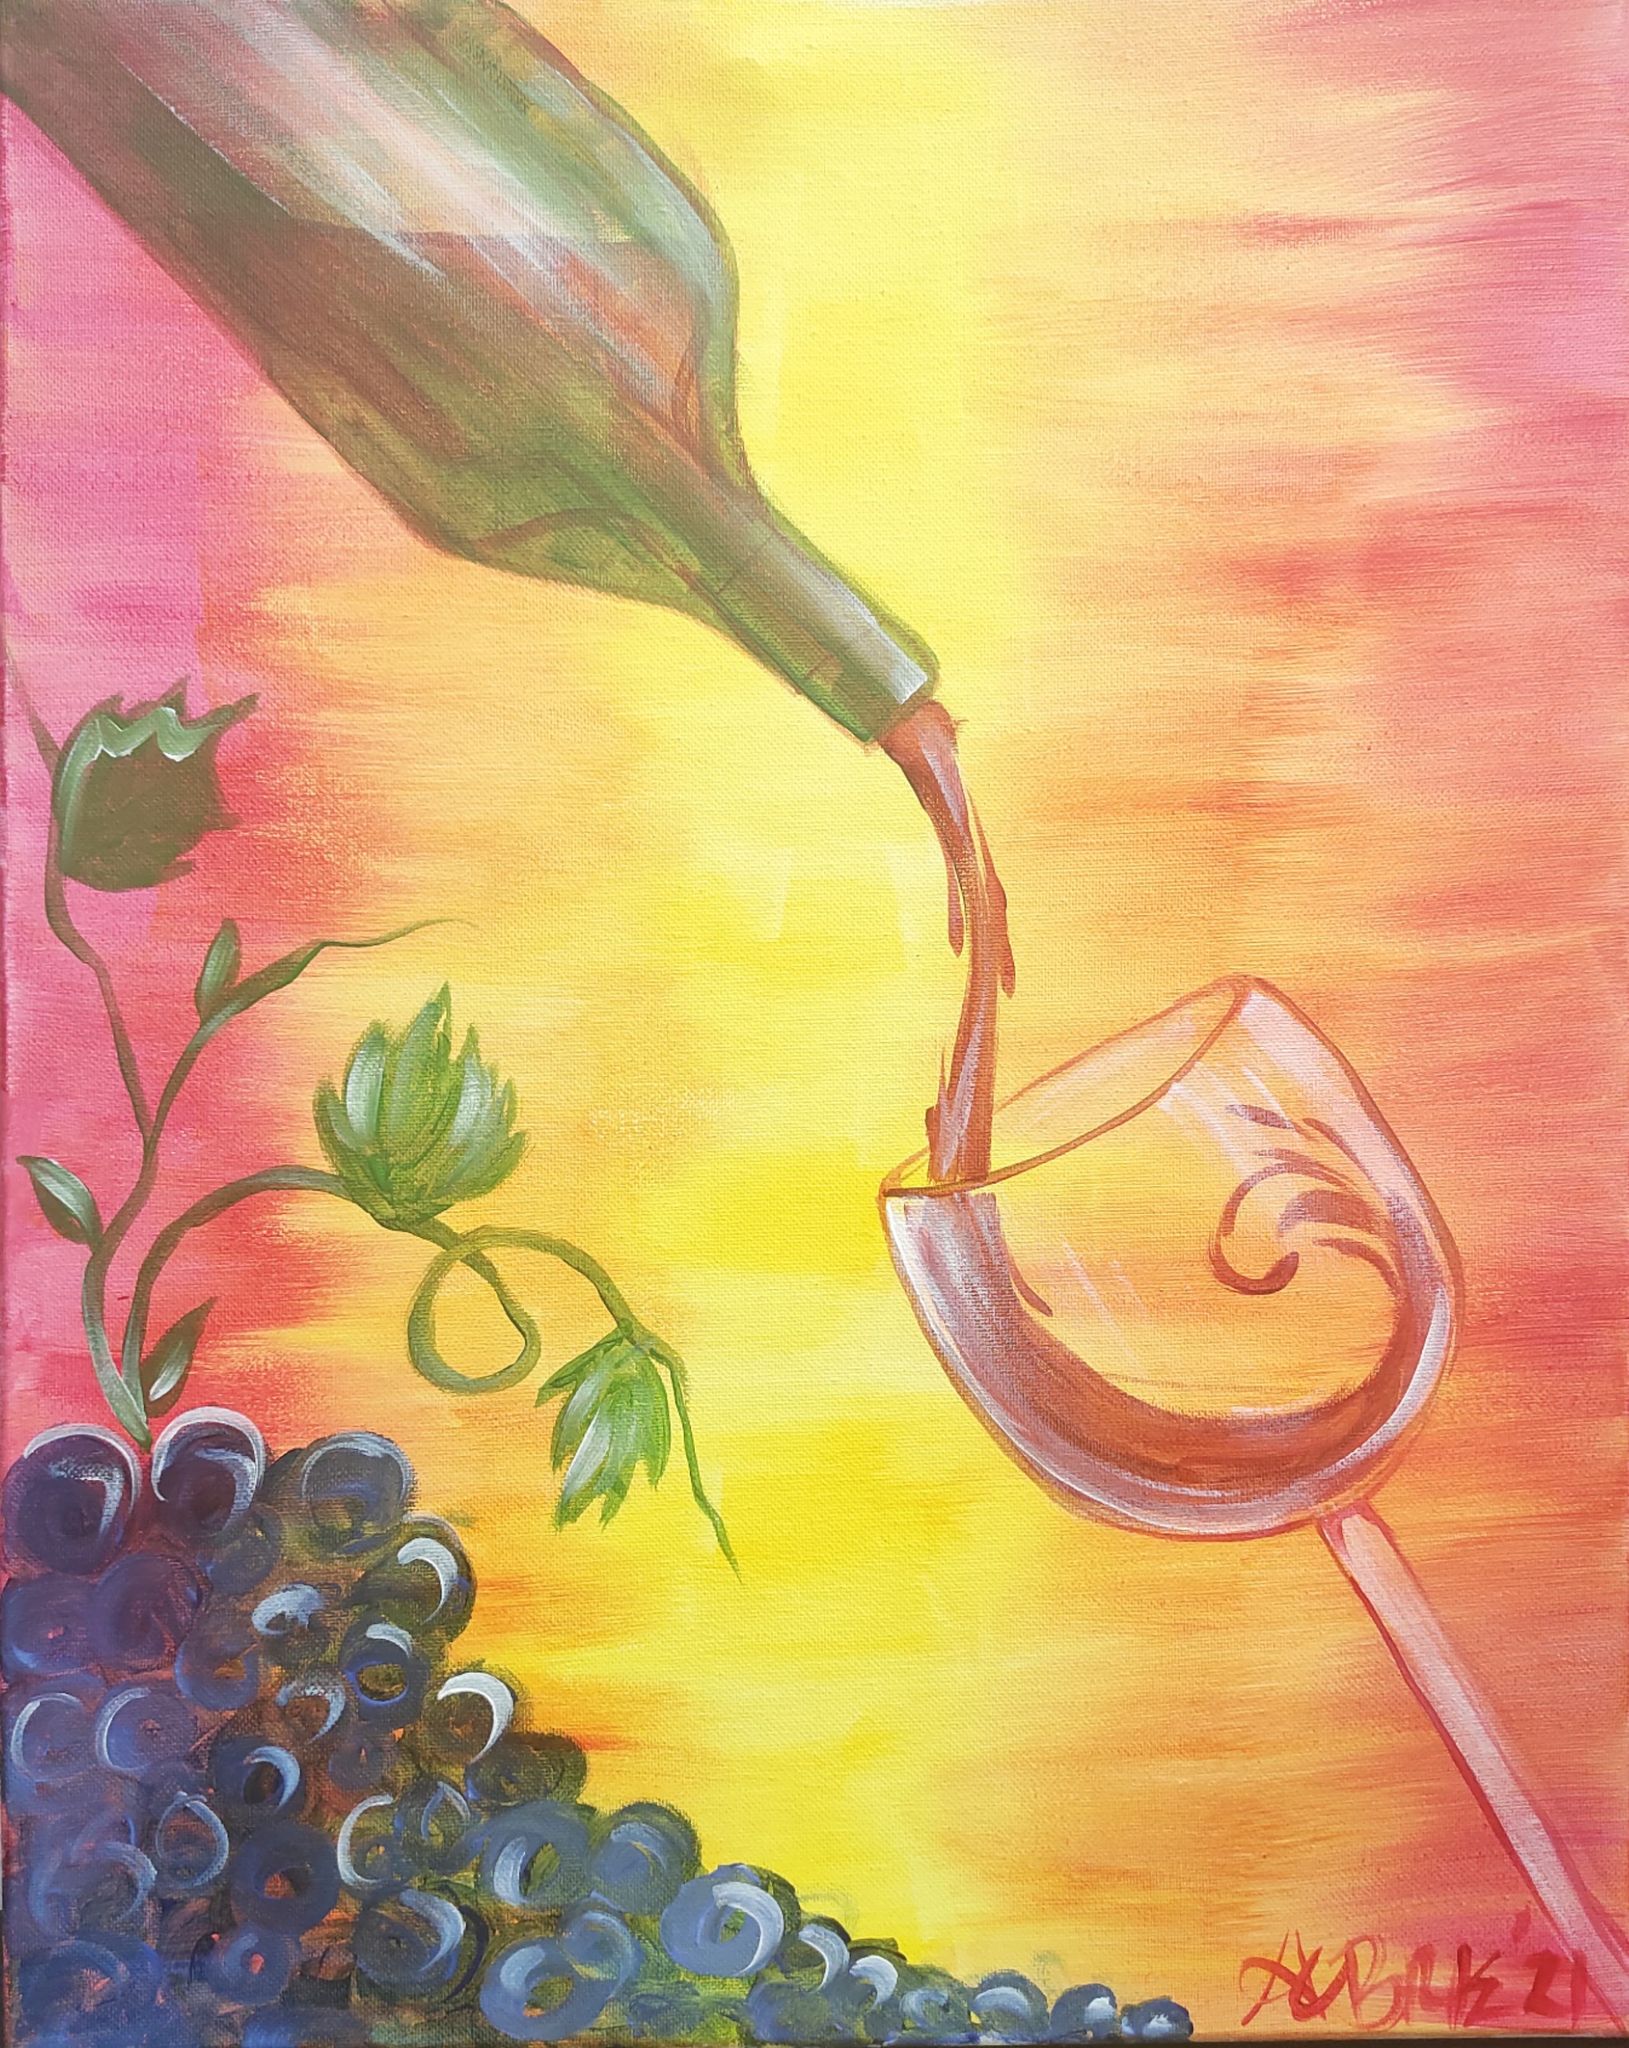 The Thirsty Canvas Paint & Sip Nites - Hosted at PartyWOW Parties - Painting Classes Near Me ...